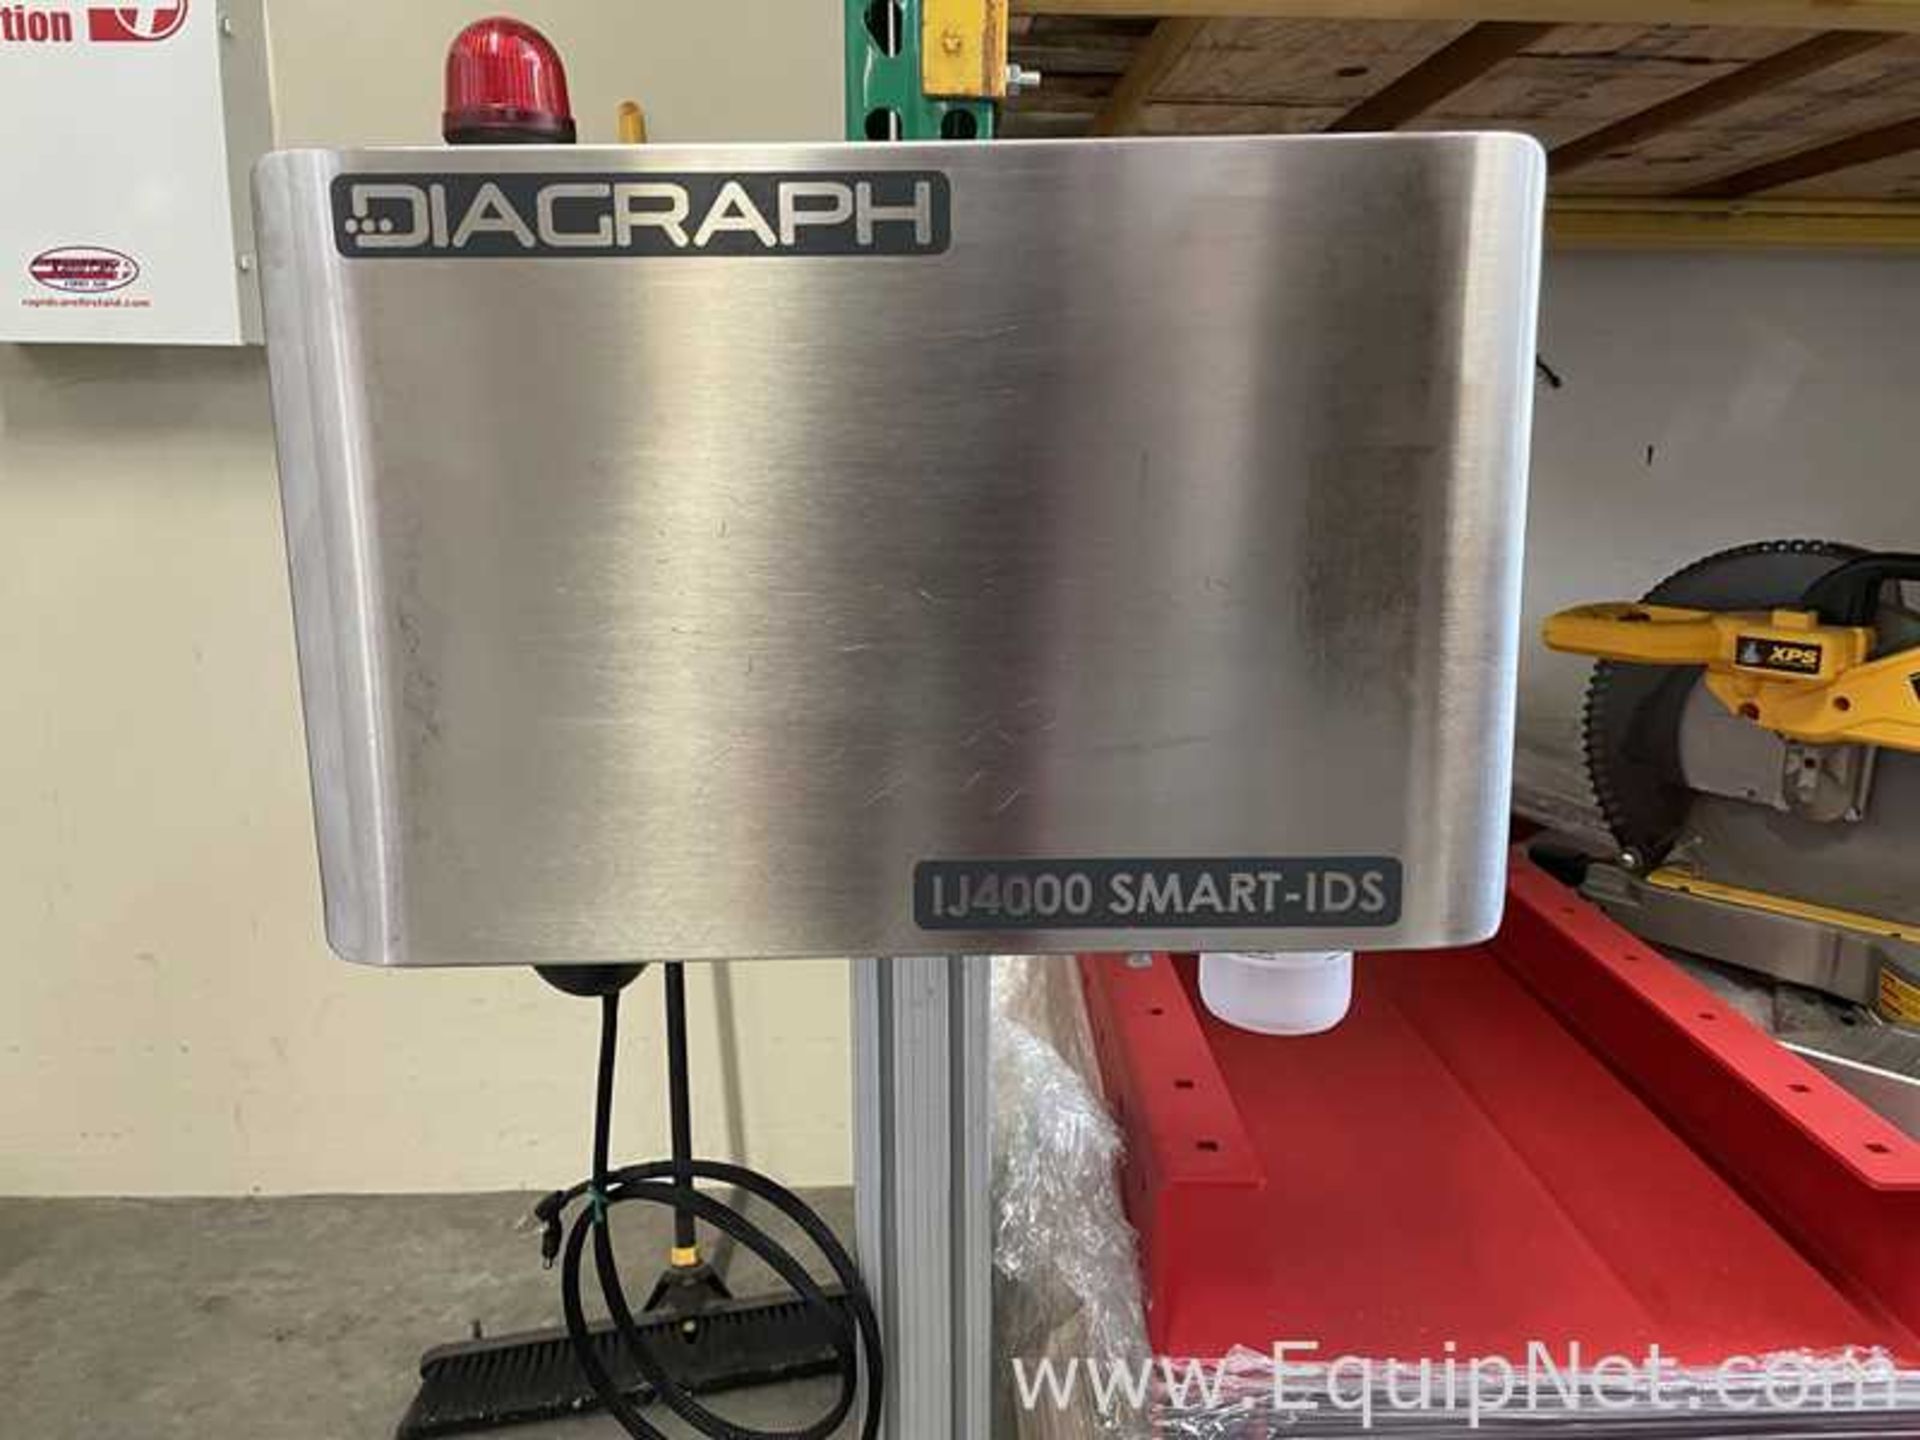 EQUIPNET LISTING #841542; REMOVAL COST: TBD; MODEL: IJ4000; DESCRIPTION: Diagraph IJ4000 Printing or - Image 17 of 21